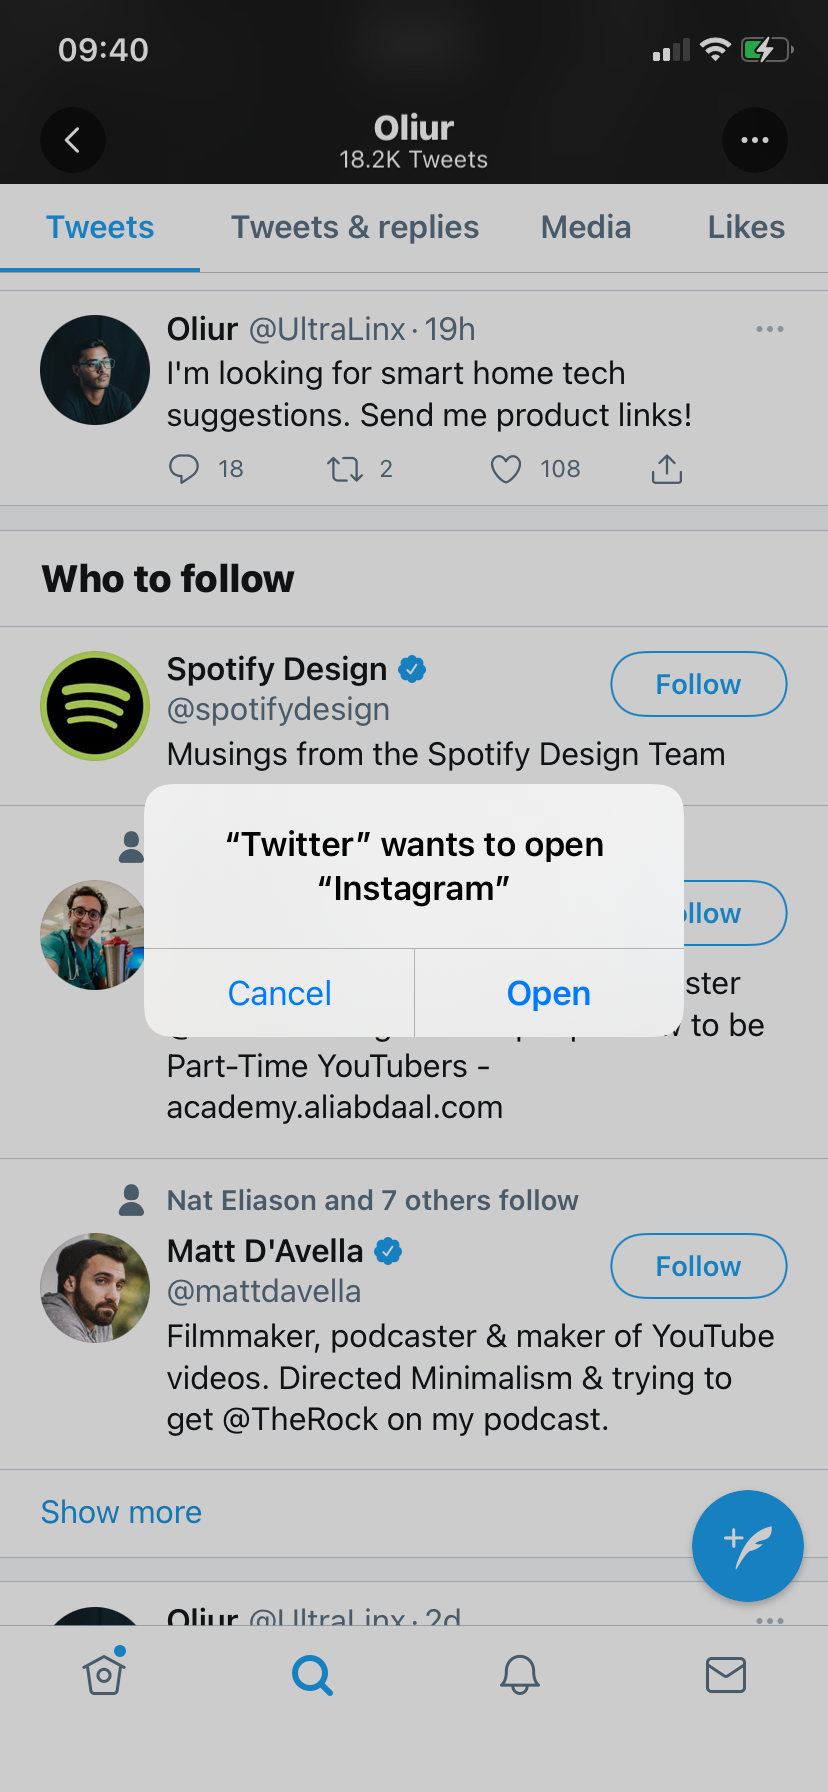 Twitter asking permission to open Instagram